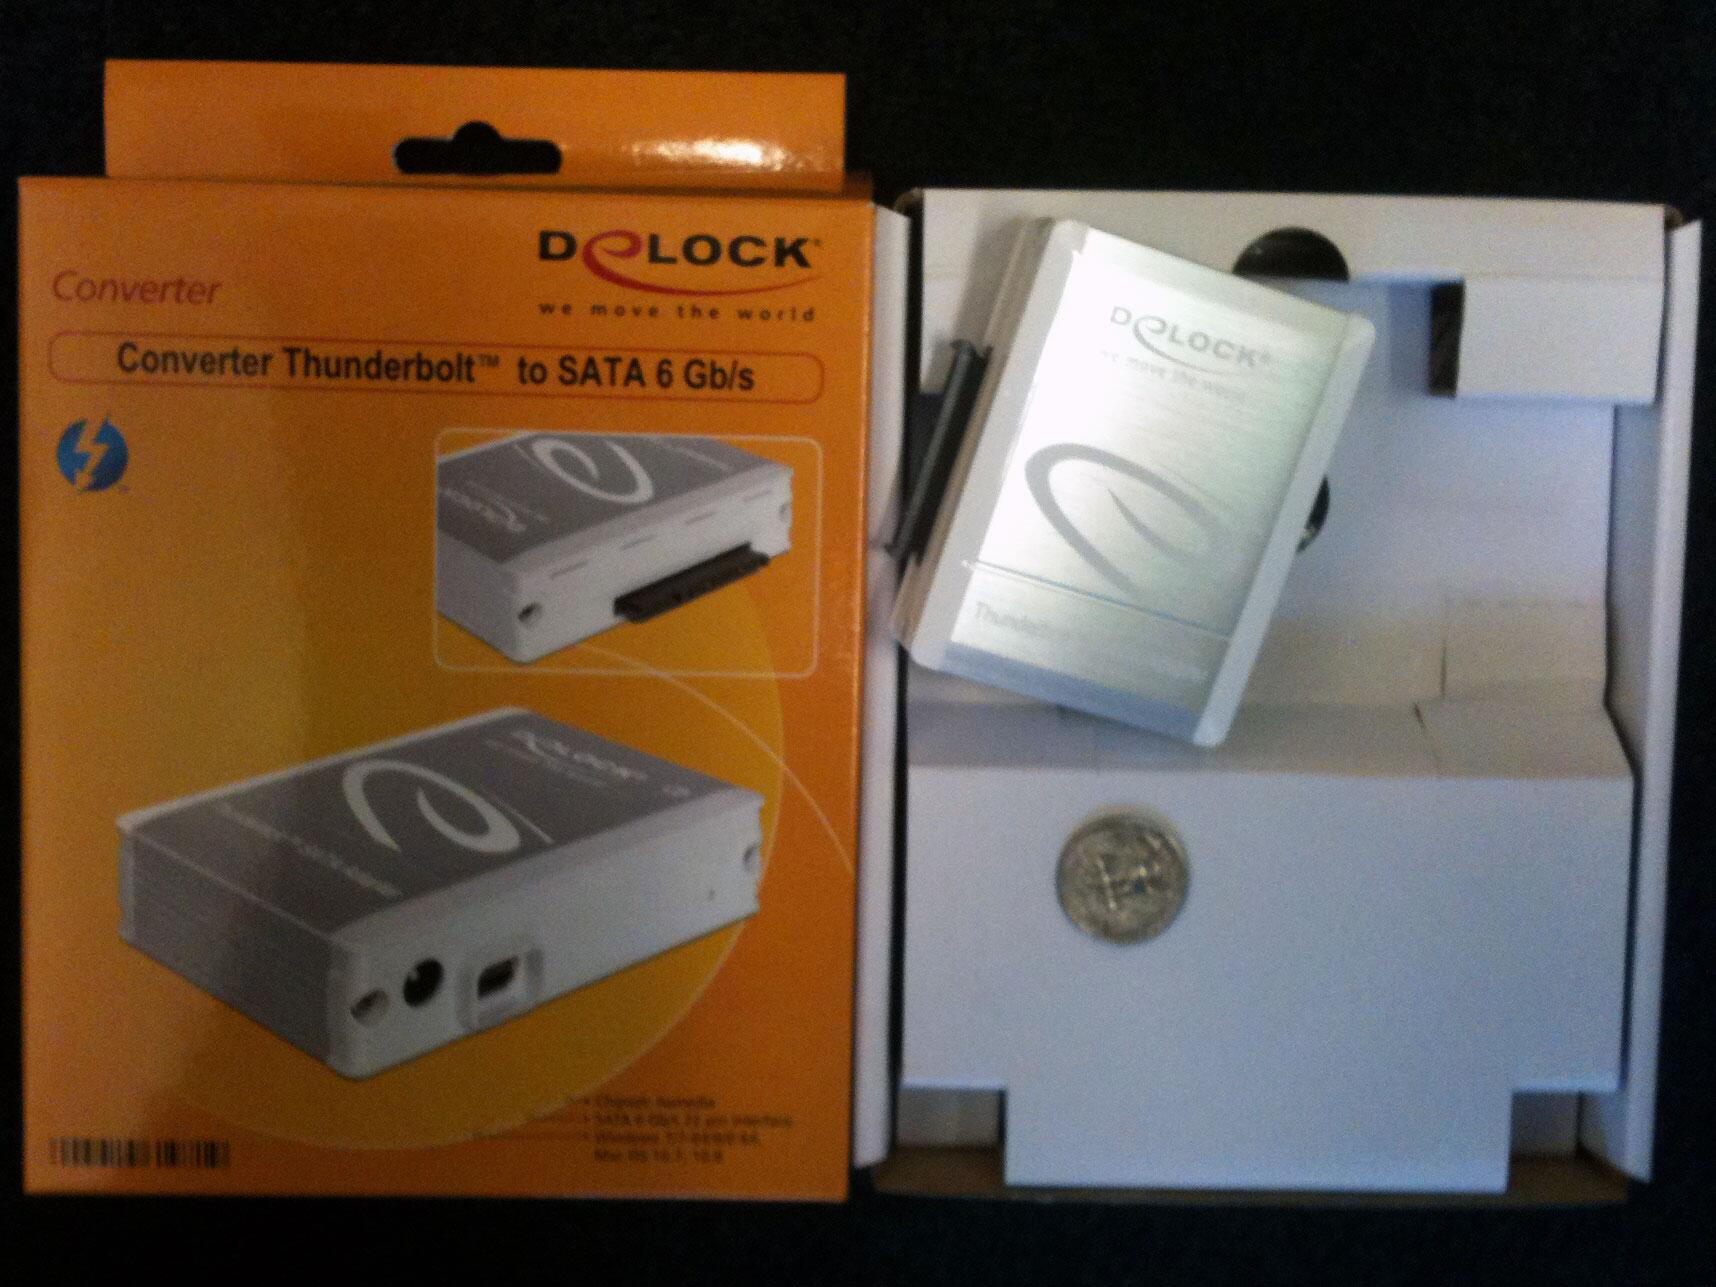 Delock 61971 Thunderbolt to SATA 6Gbps HDD/SSD Drive Adaptor + AC Adapter